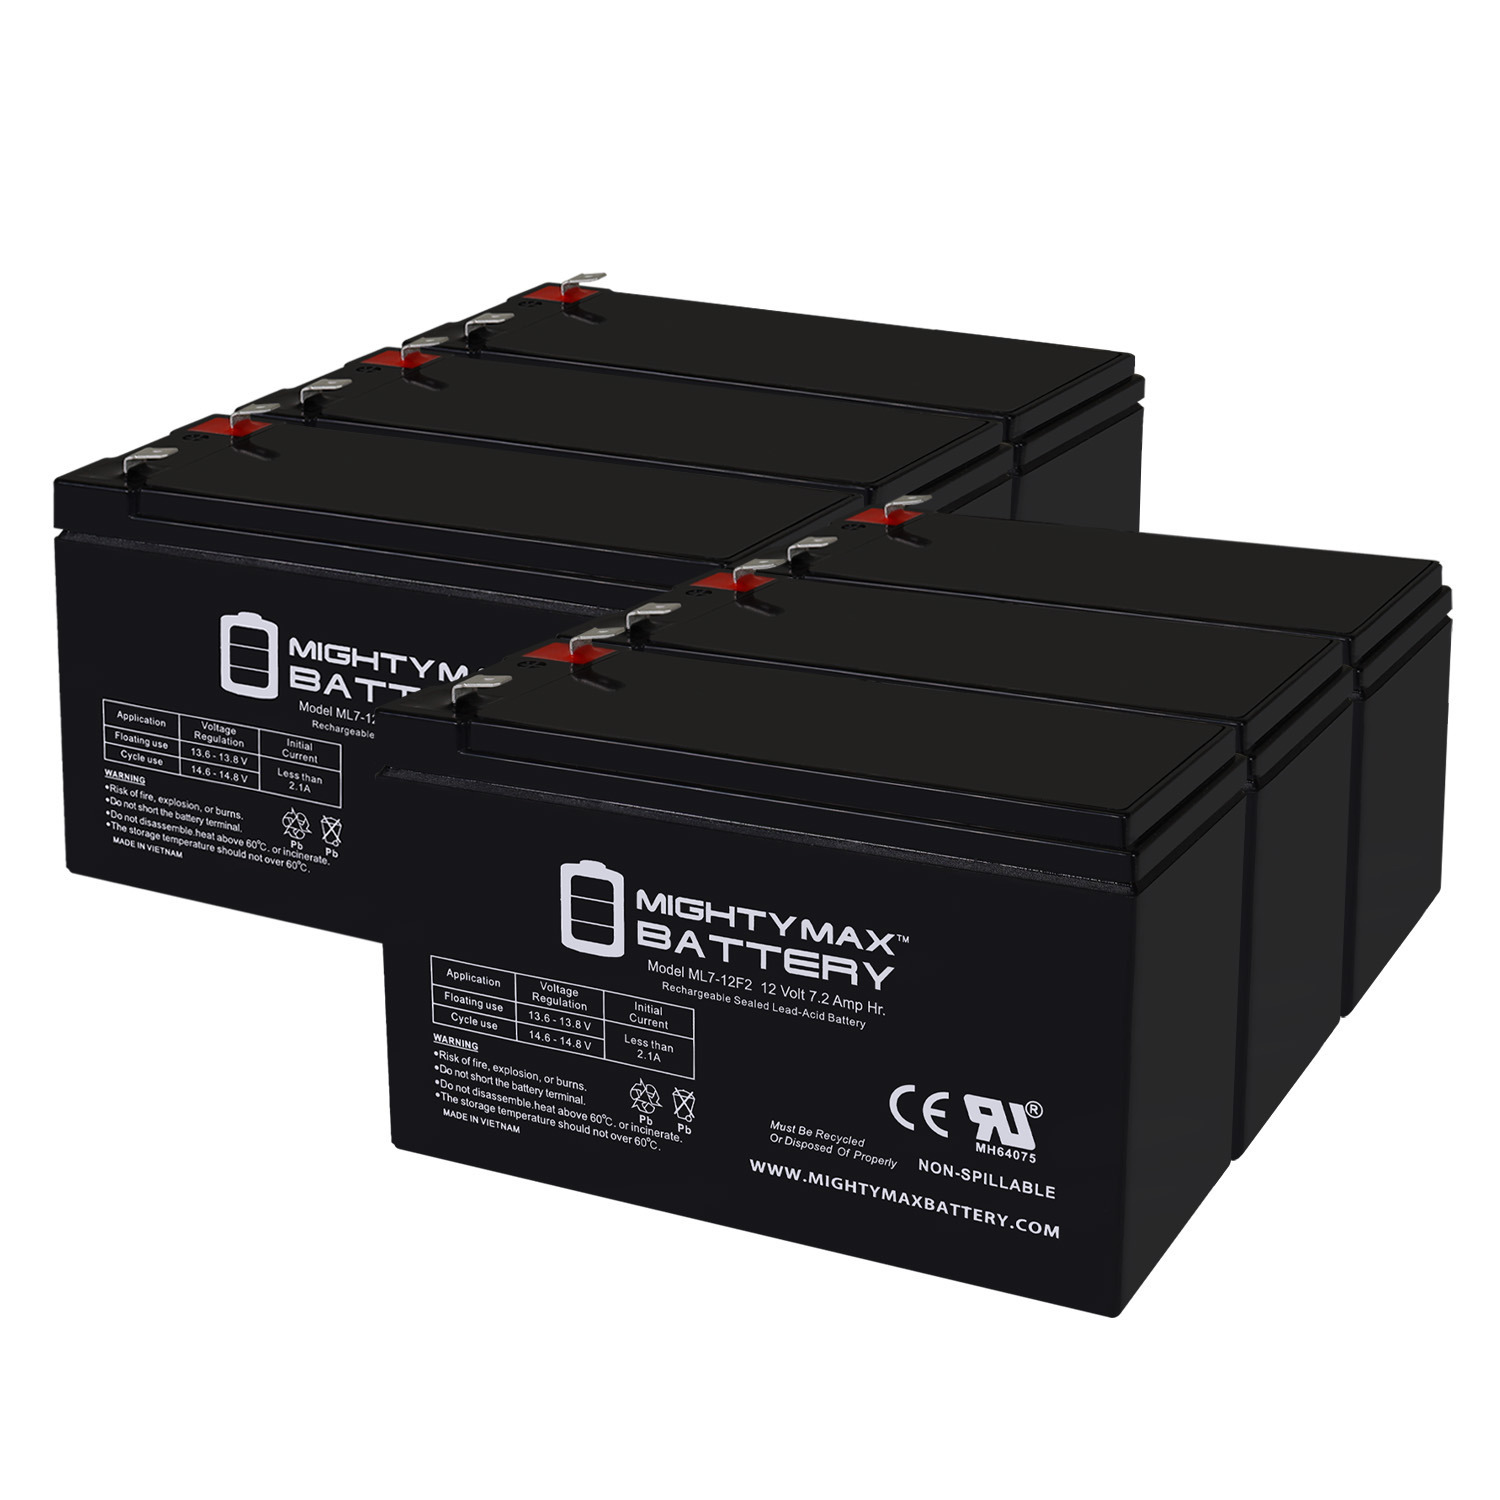 12V 7Ah F2 Replacement Battery for Ion Pathfinder, Pathfinder 2 - 6 Pack